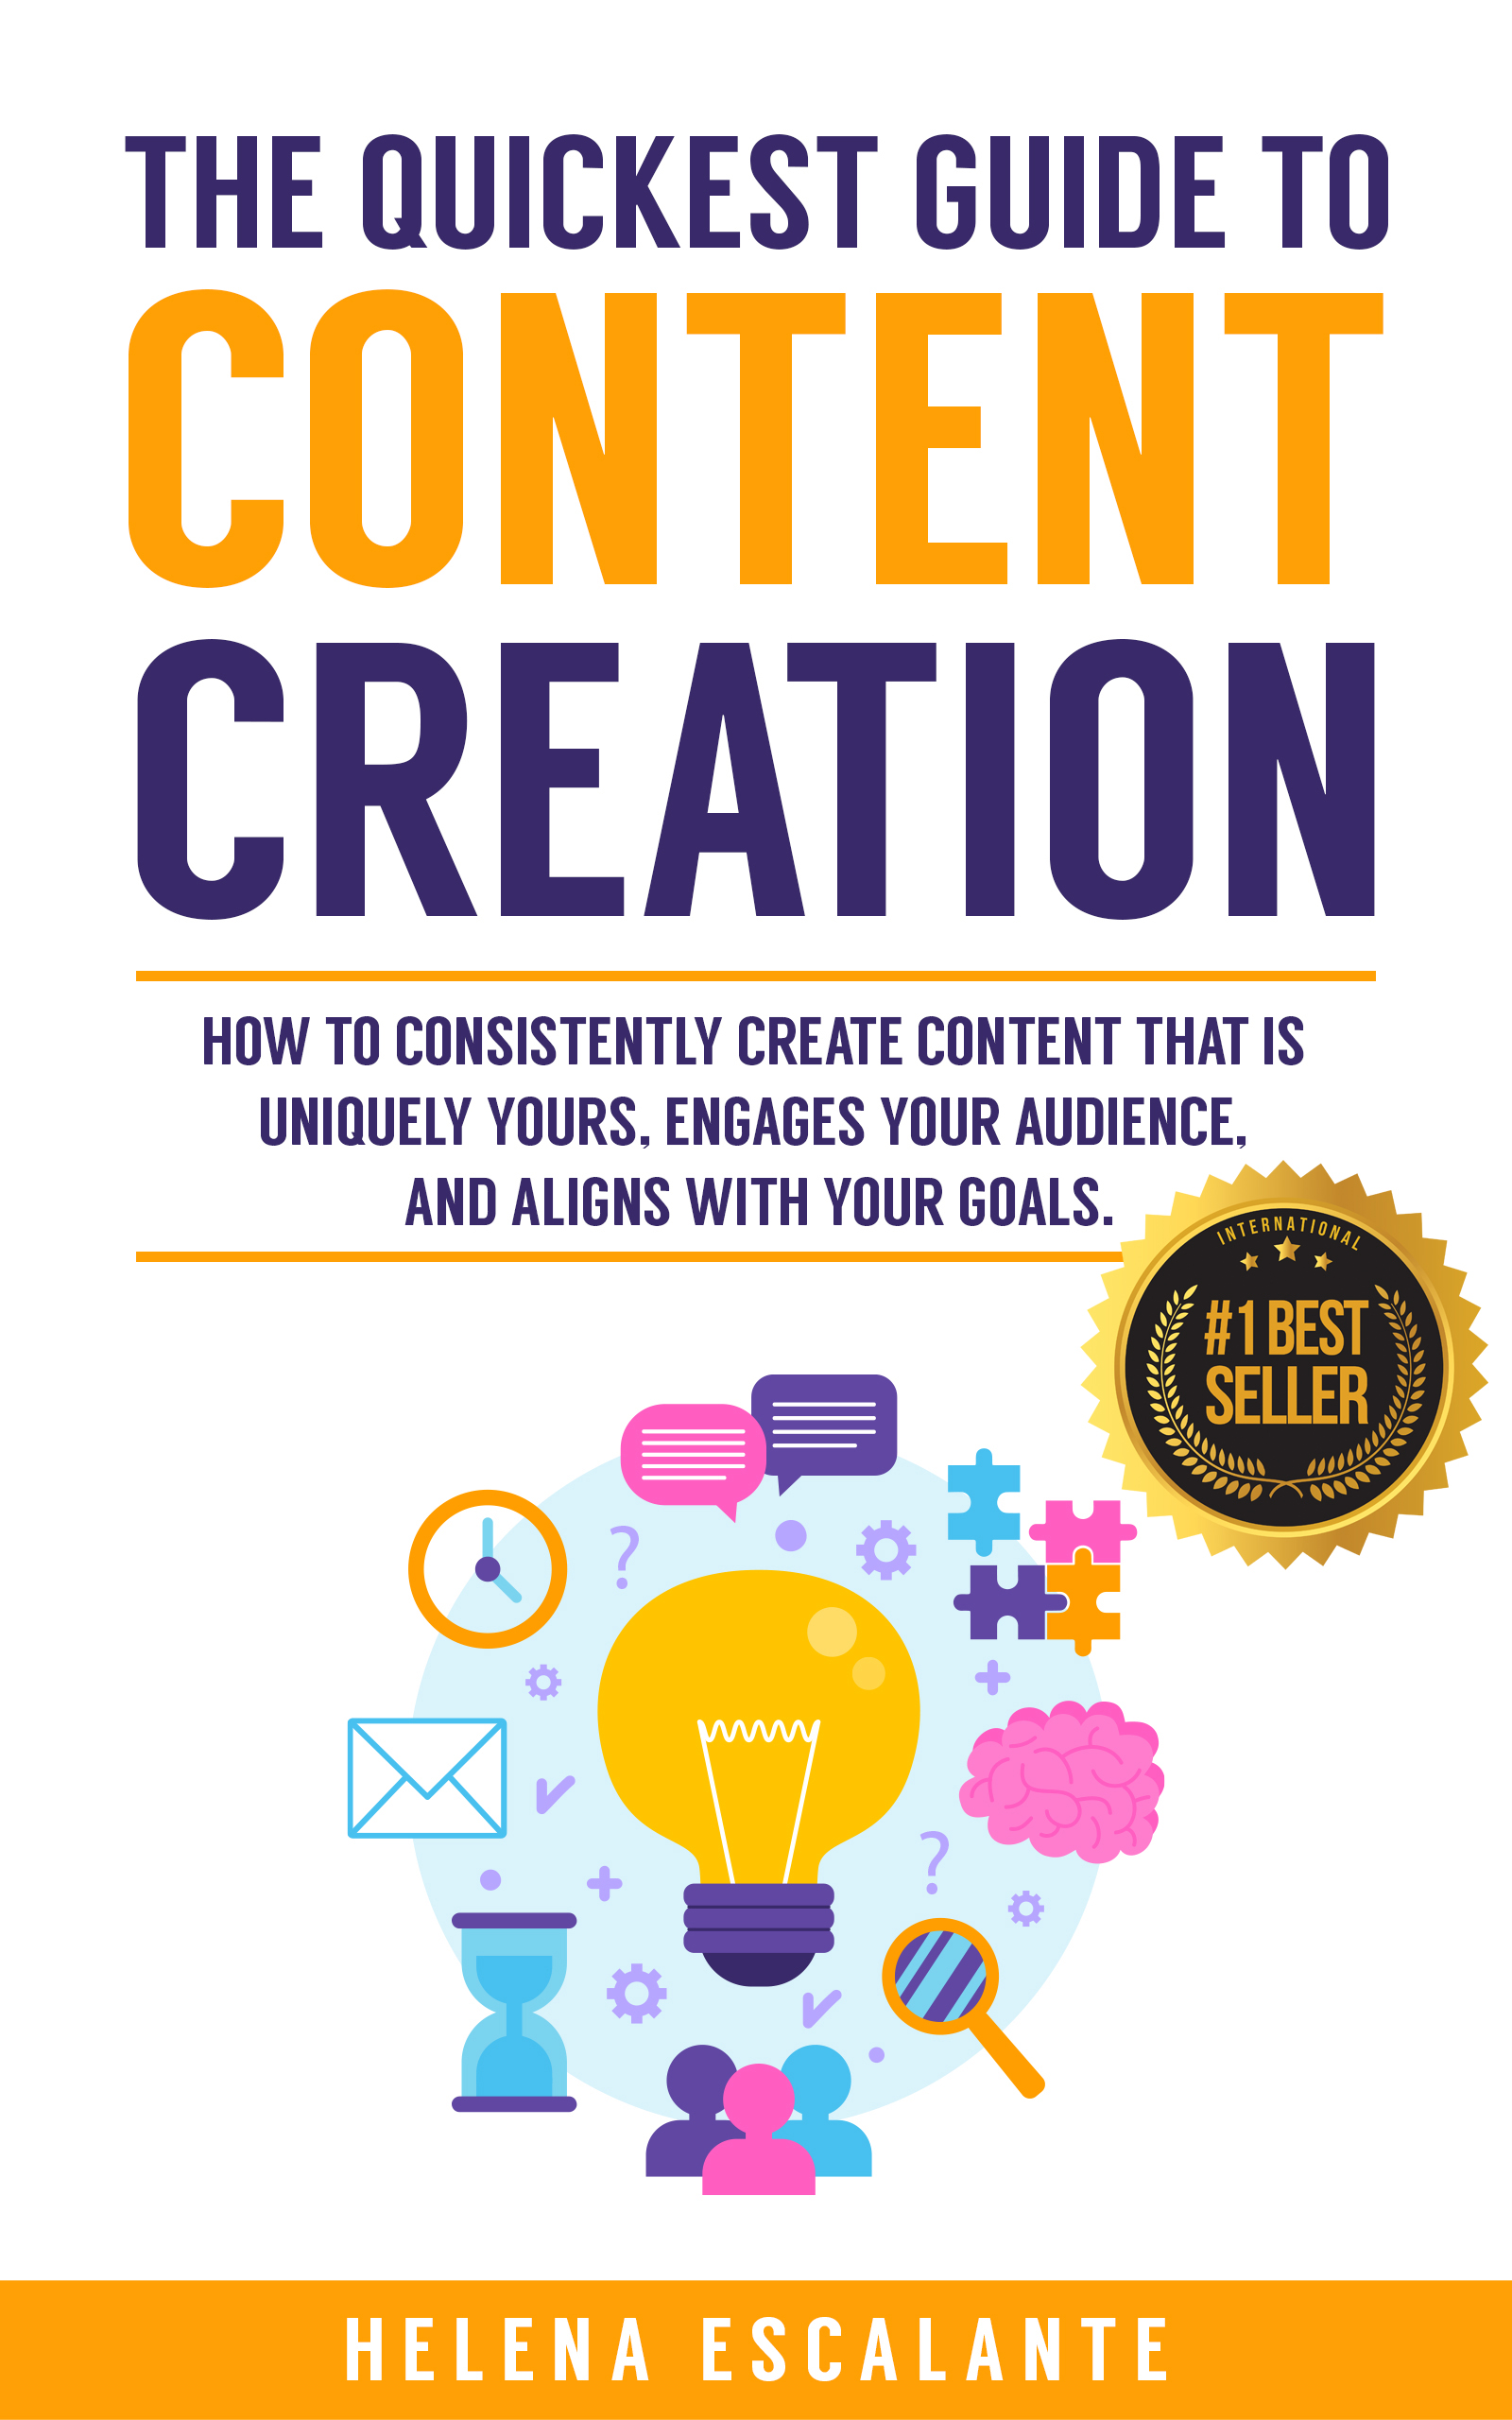 Cover of The Quickest Guide to Content Creation by Helena Escalante with #1 Best Seller Badge